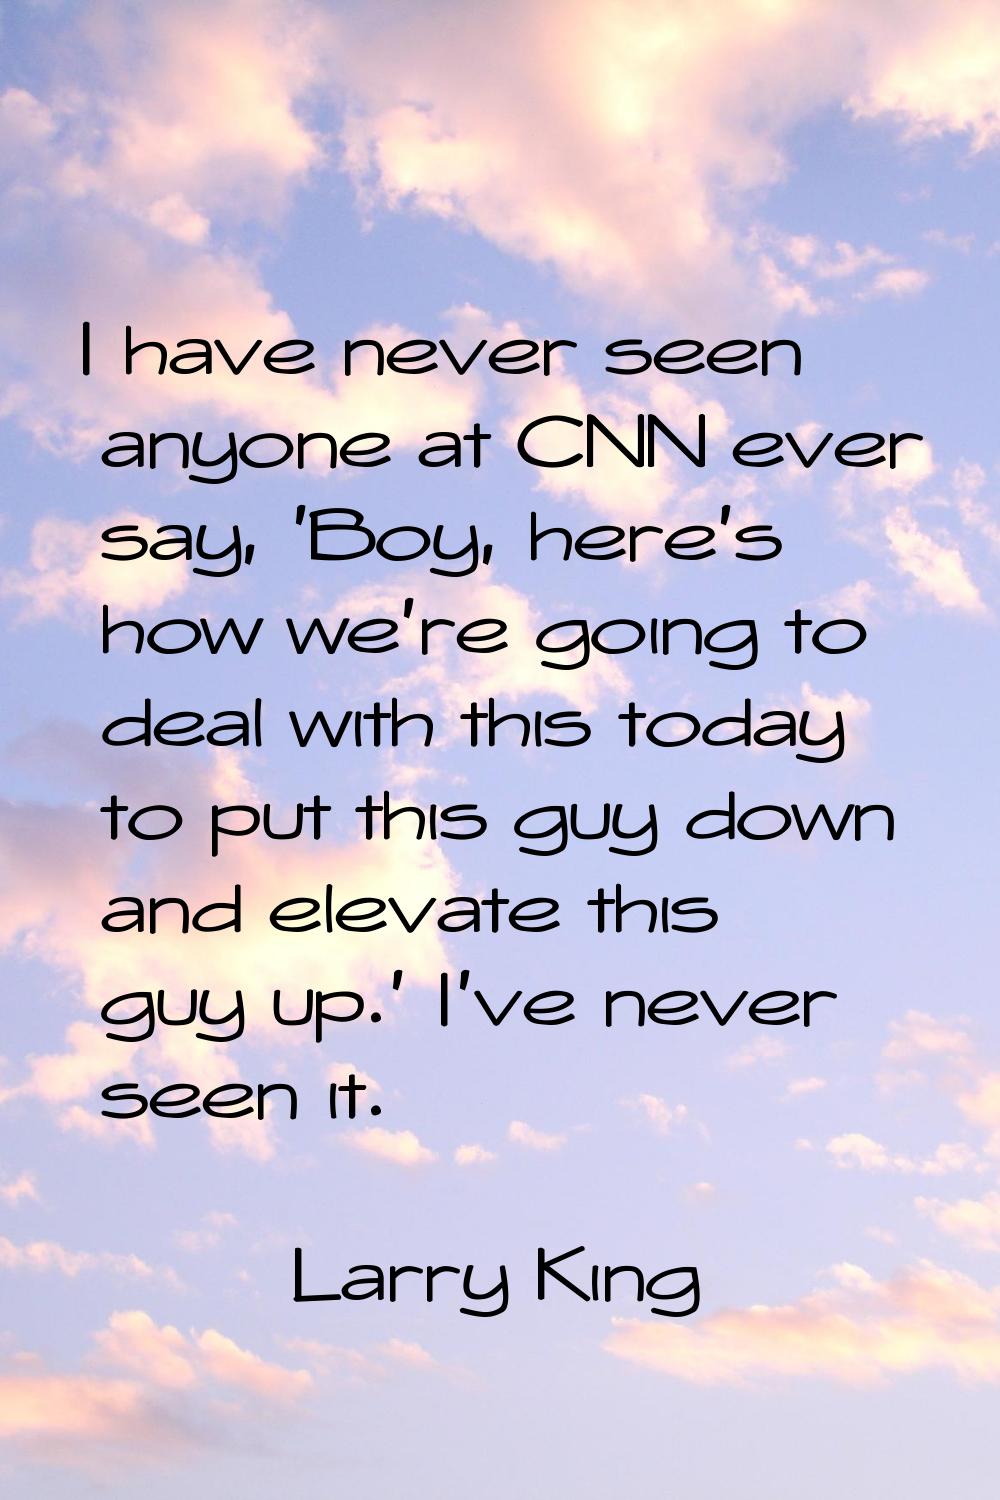 I have never seen anyone at CNN ever say, 'Boy, here's how we're going to deal with this today to p